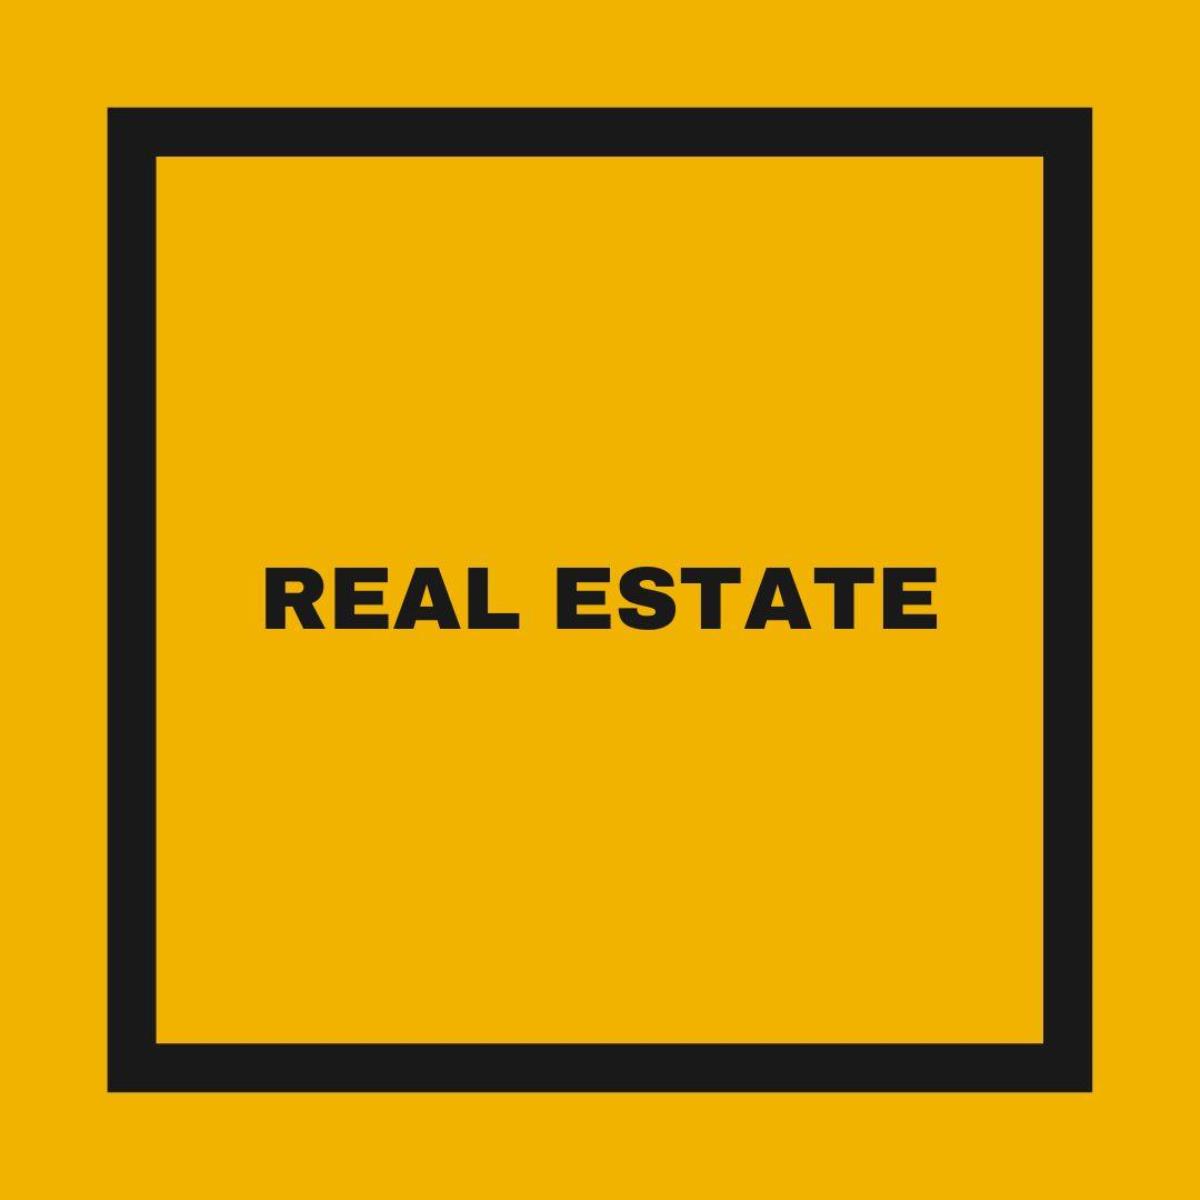 Business Directory - Real Estate